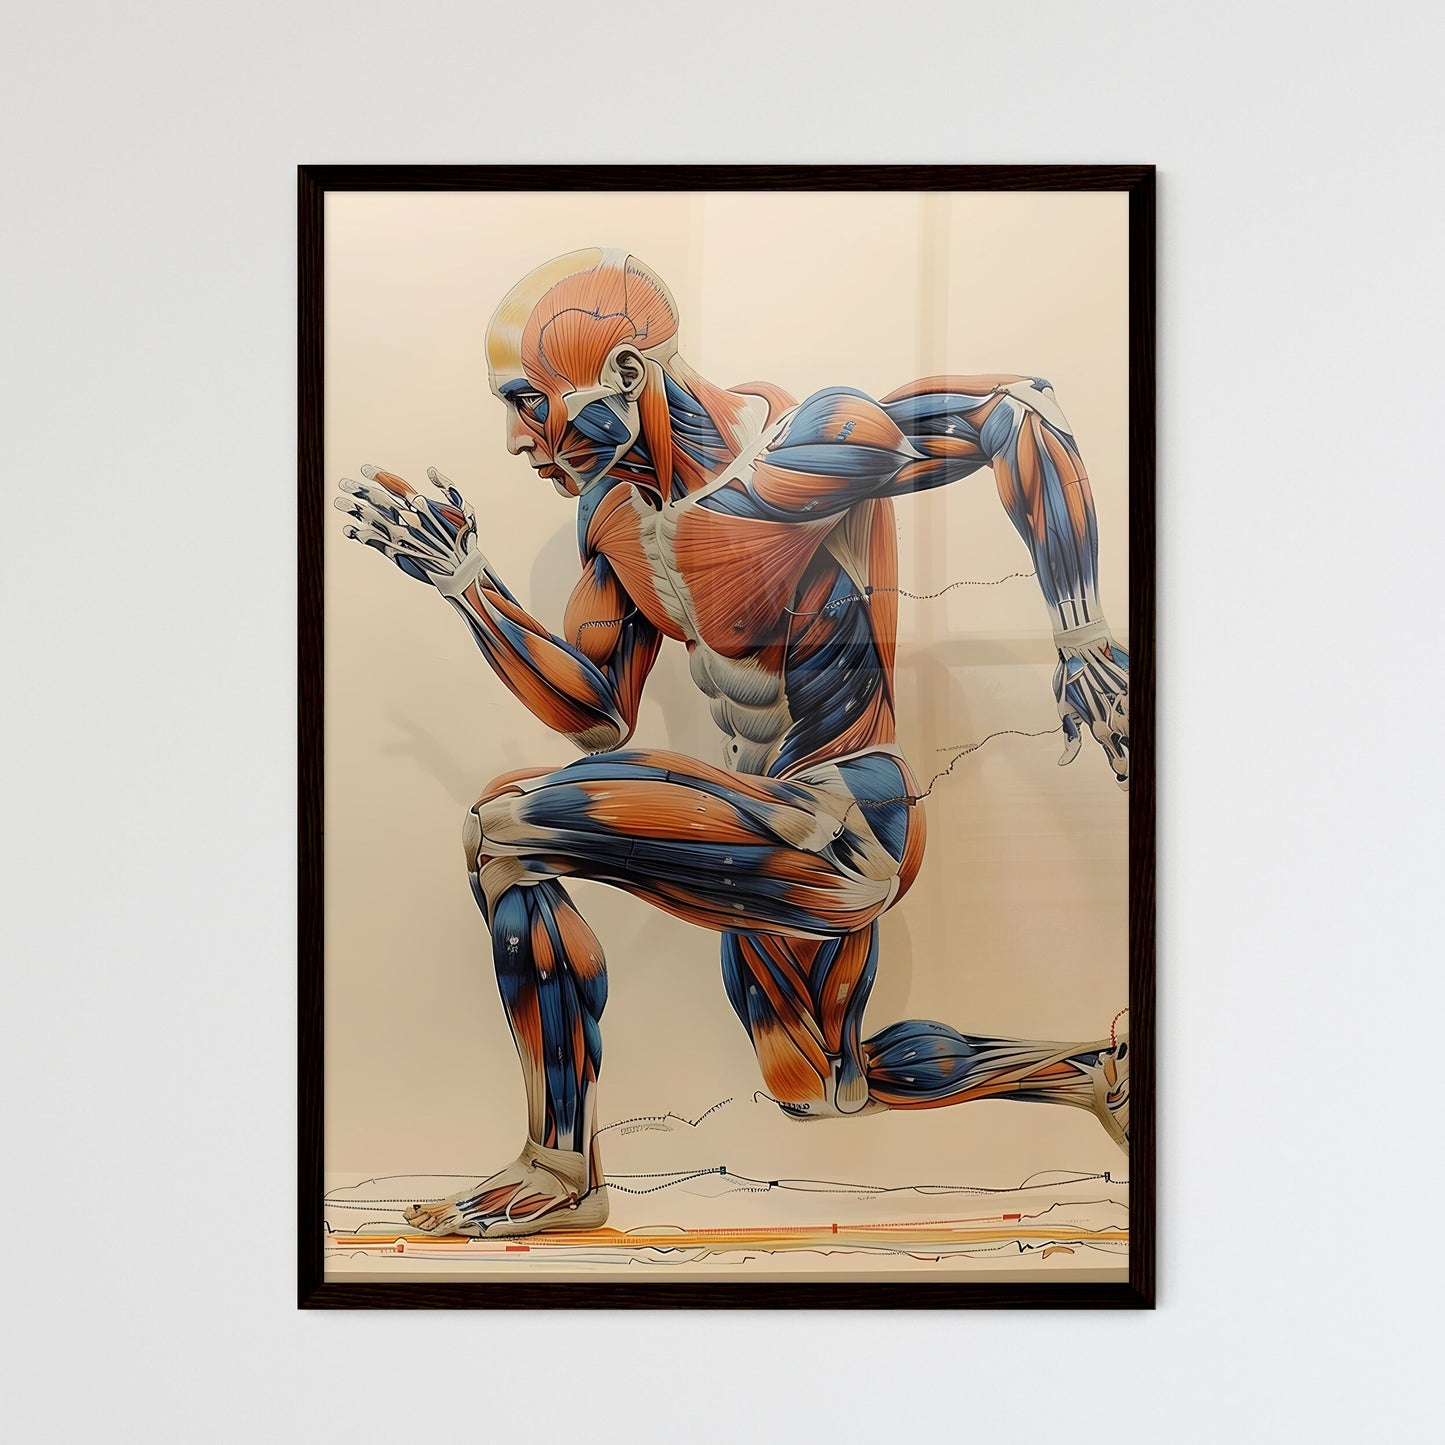 Human Full Body Running Musculature Anatomy Art: Hand-Drawn Painting Focusing on Artistic Depiction Default Title